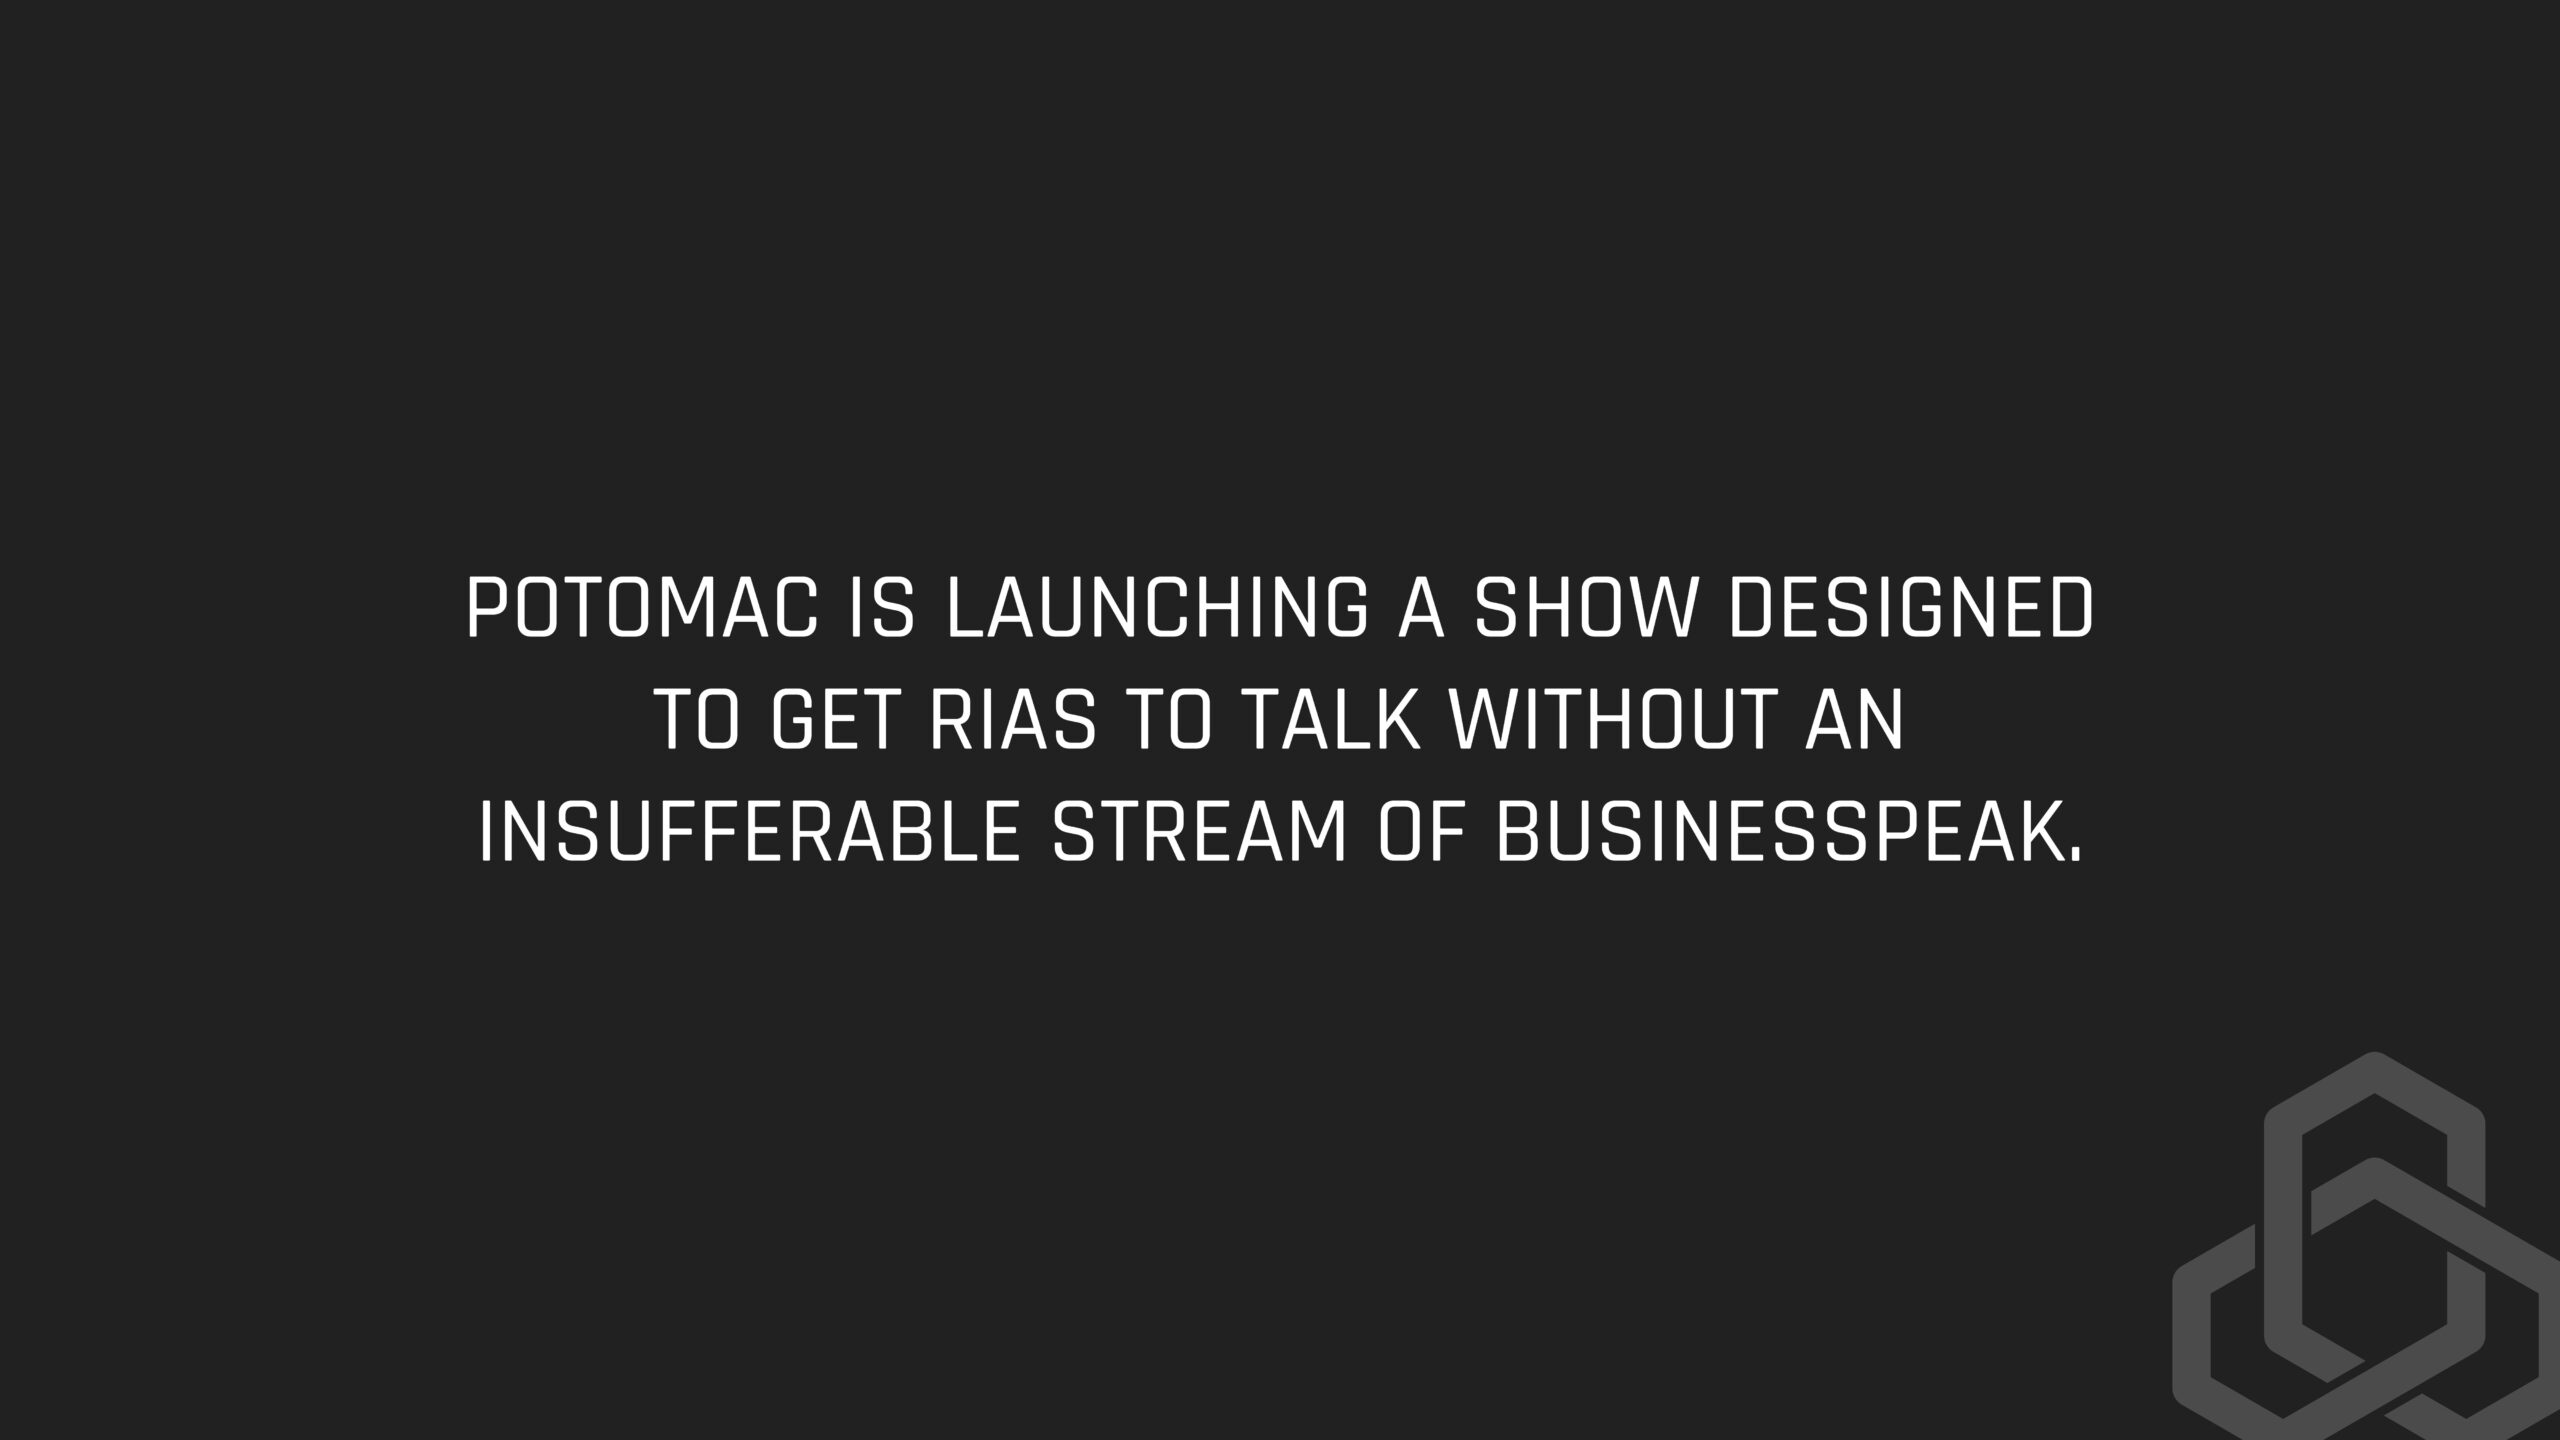 Potomac is launching a show designed to get RIAs to talk without an insufferable stream of businesspeak.